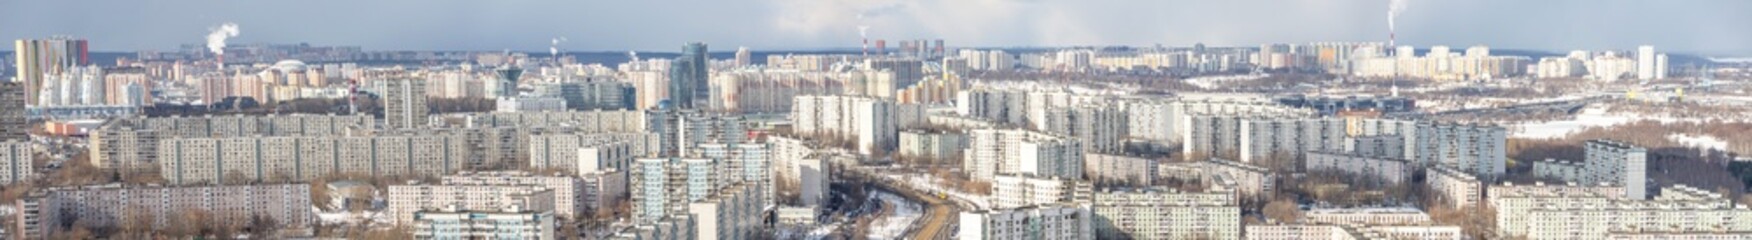 Ultra-wide panorama of the dormitory area of the metropolis of the metropolitan area, countless high multi-storey buildings.